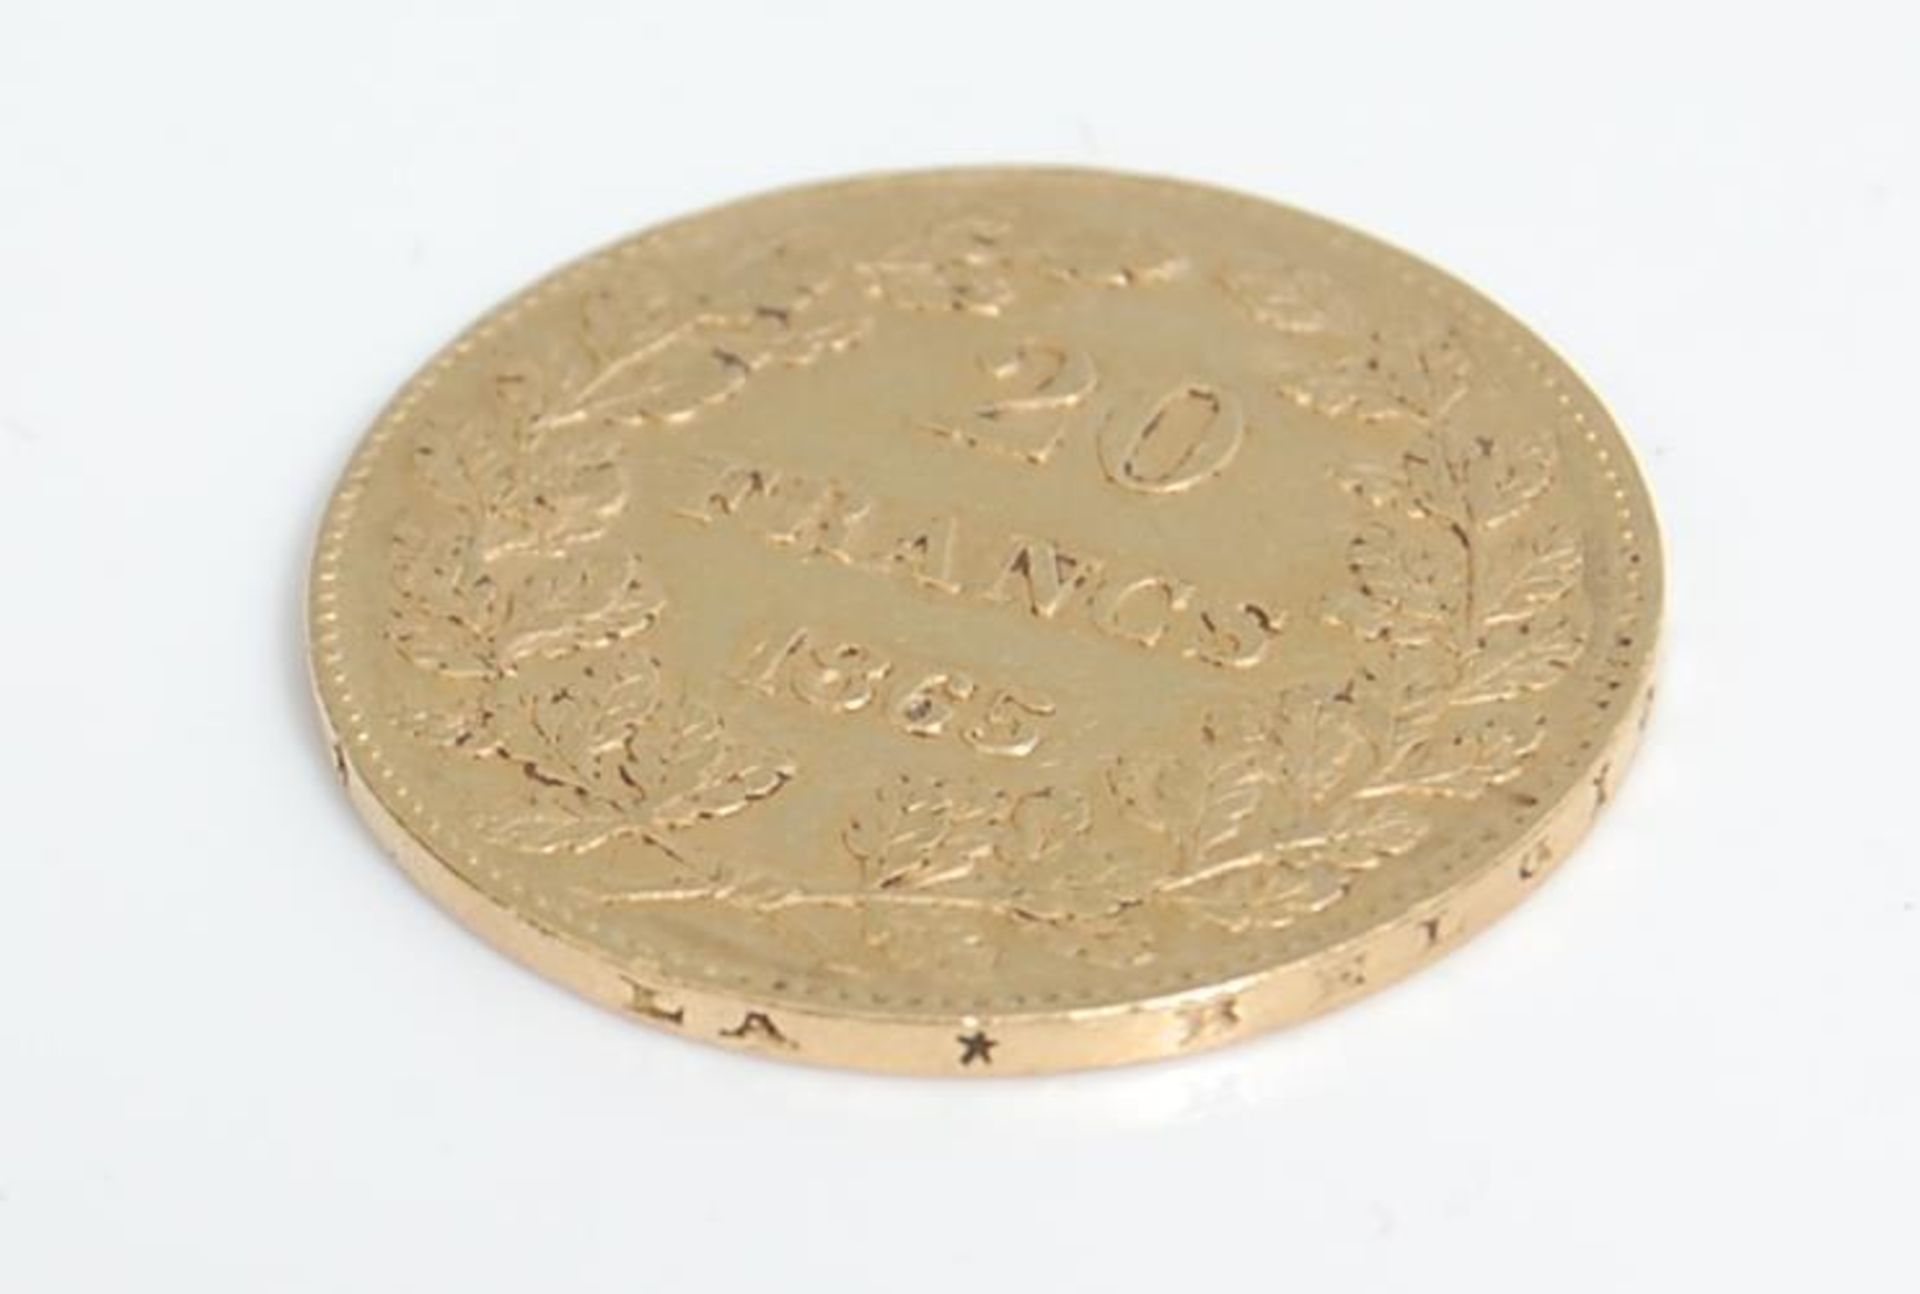 19TH CENTURY BELGIAN FRANC GOLD COIN - Image 3 of 3